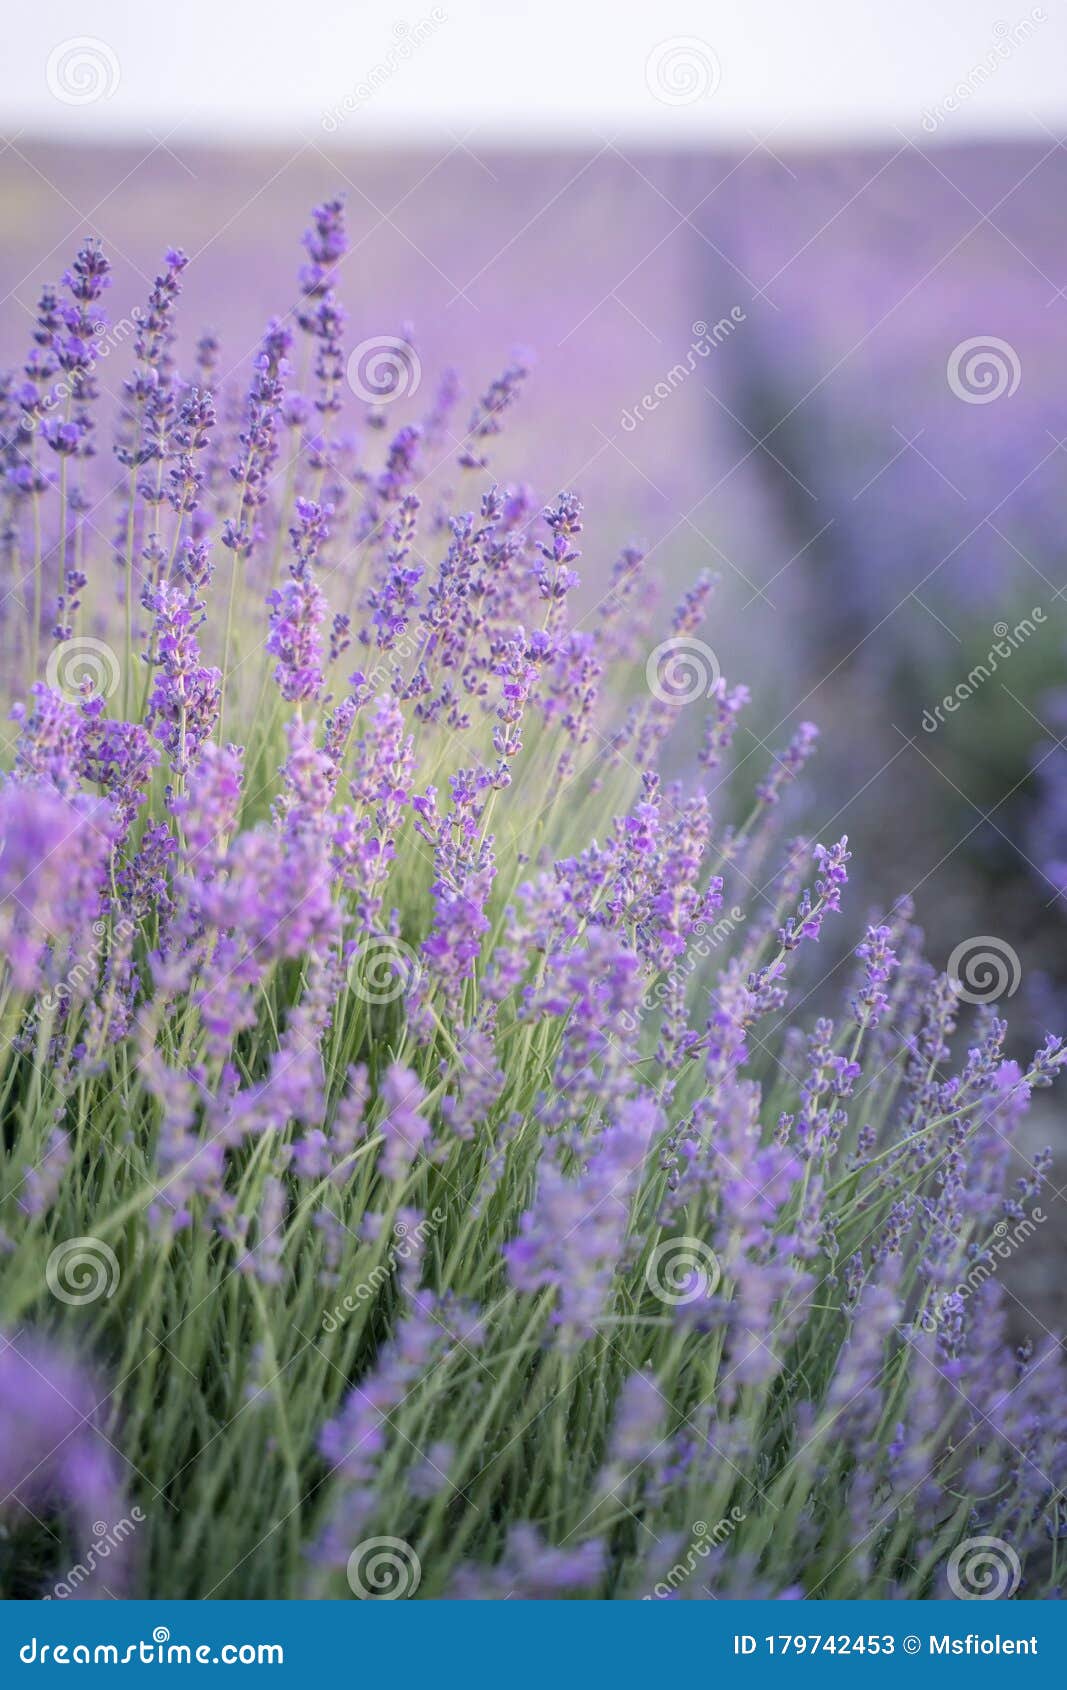 Lavender Field On A Sunny Day Lavender Bushes In Rows Stock Image